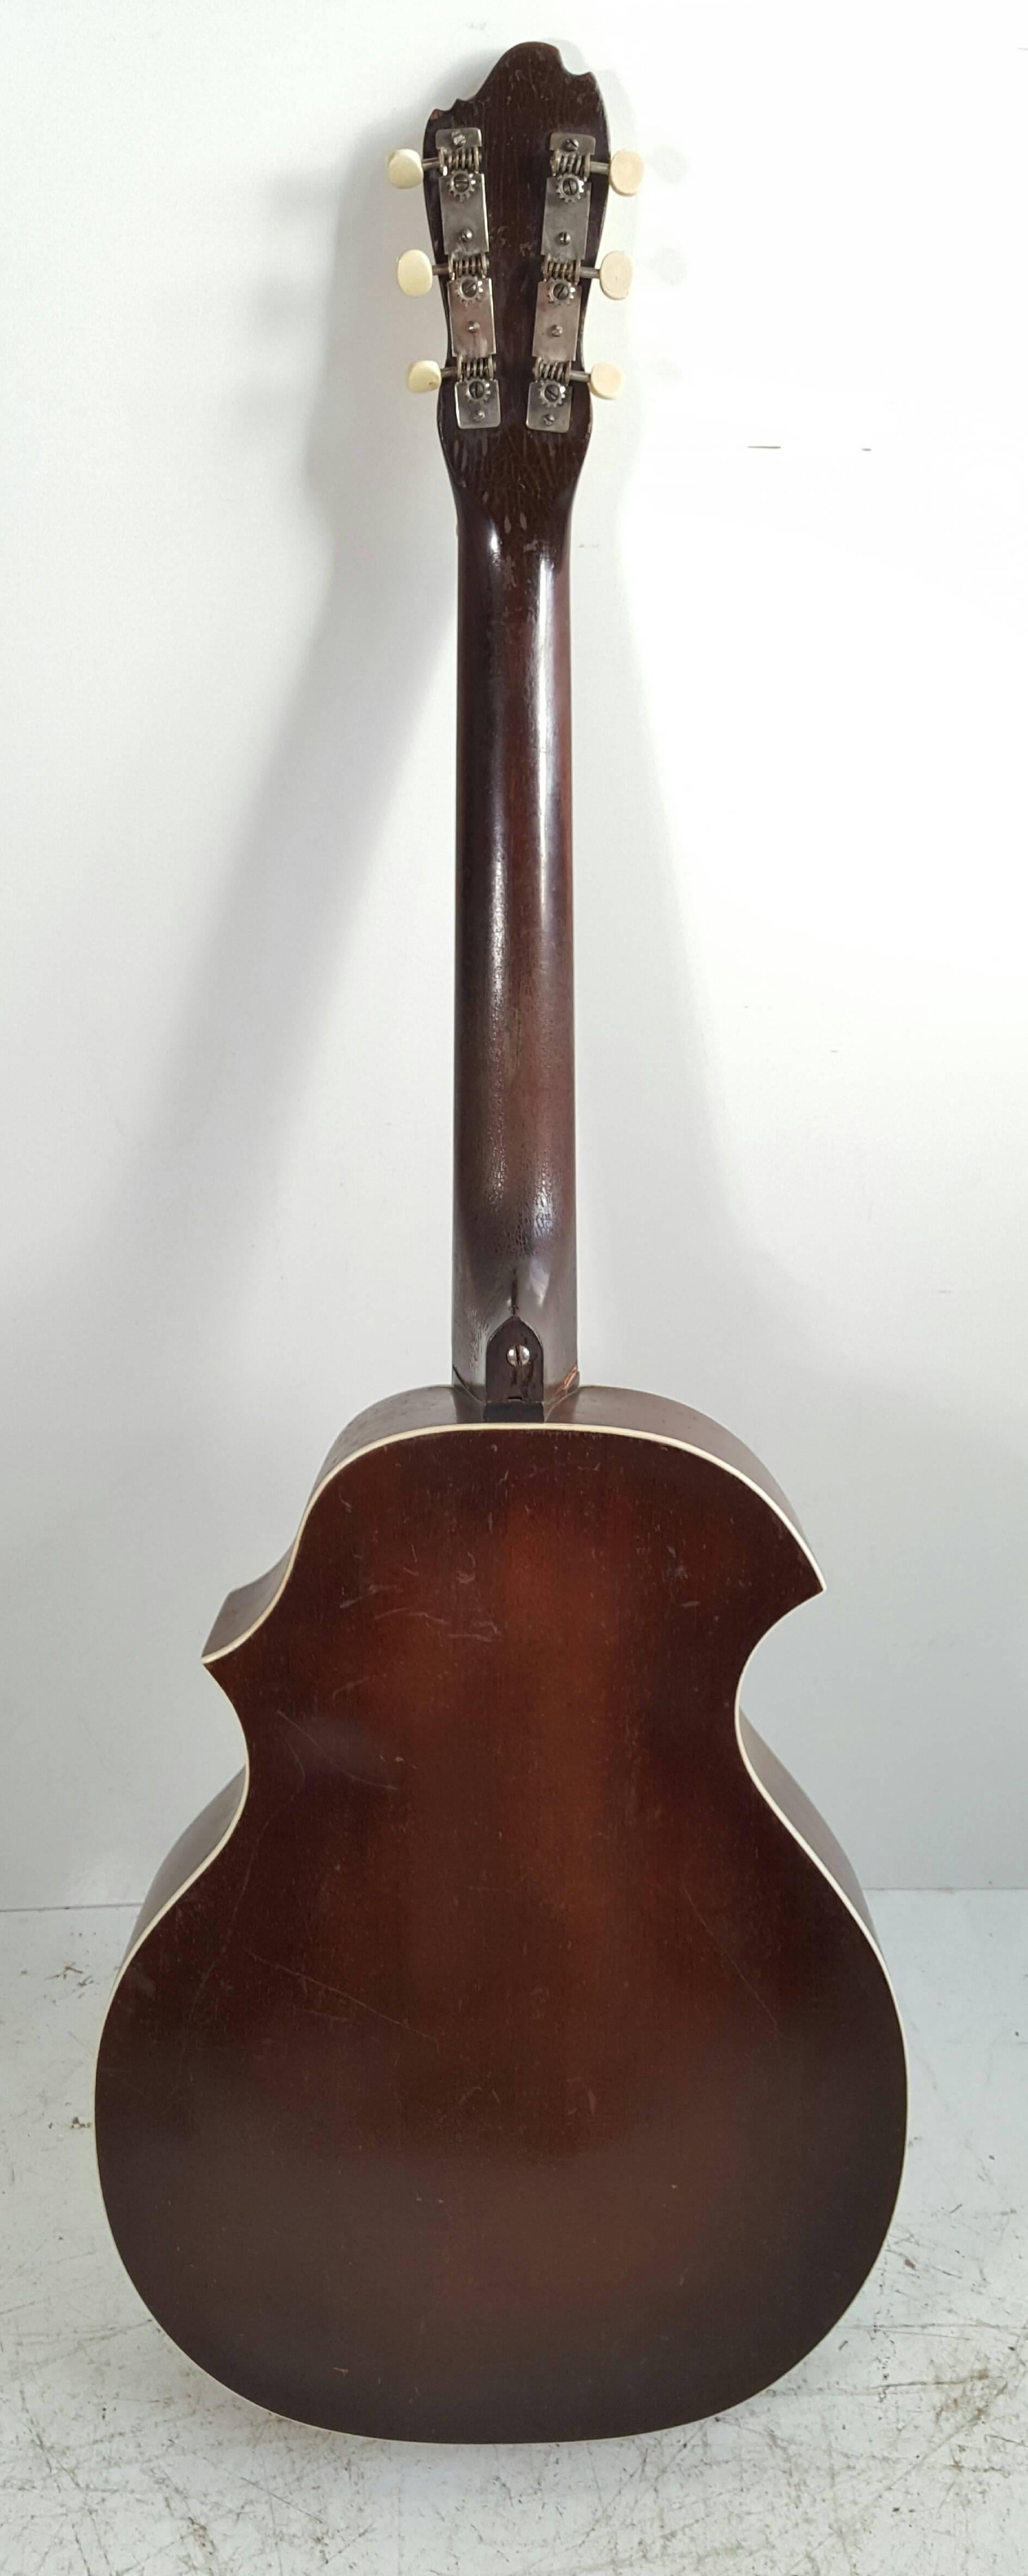 Seldom seen, early Kay Kraft acoustic guitar, wonderful styling, great playing instrument, nice original condition, minor crack to top, does not affect sound, missing pick guard.

The Kay Guitar Company was a division of the Kay Musical Instrument